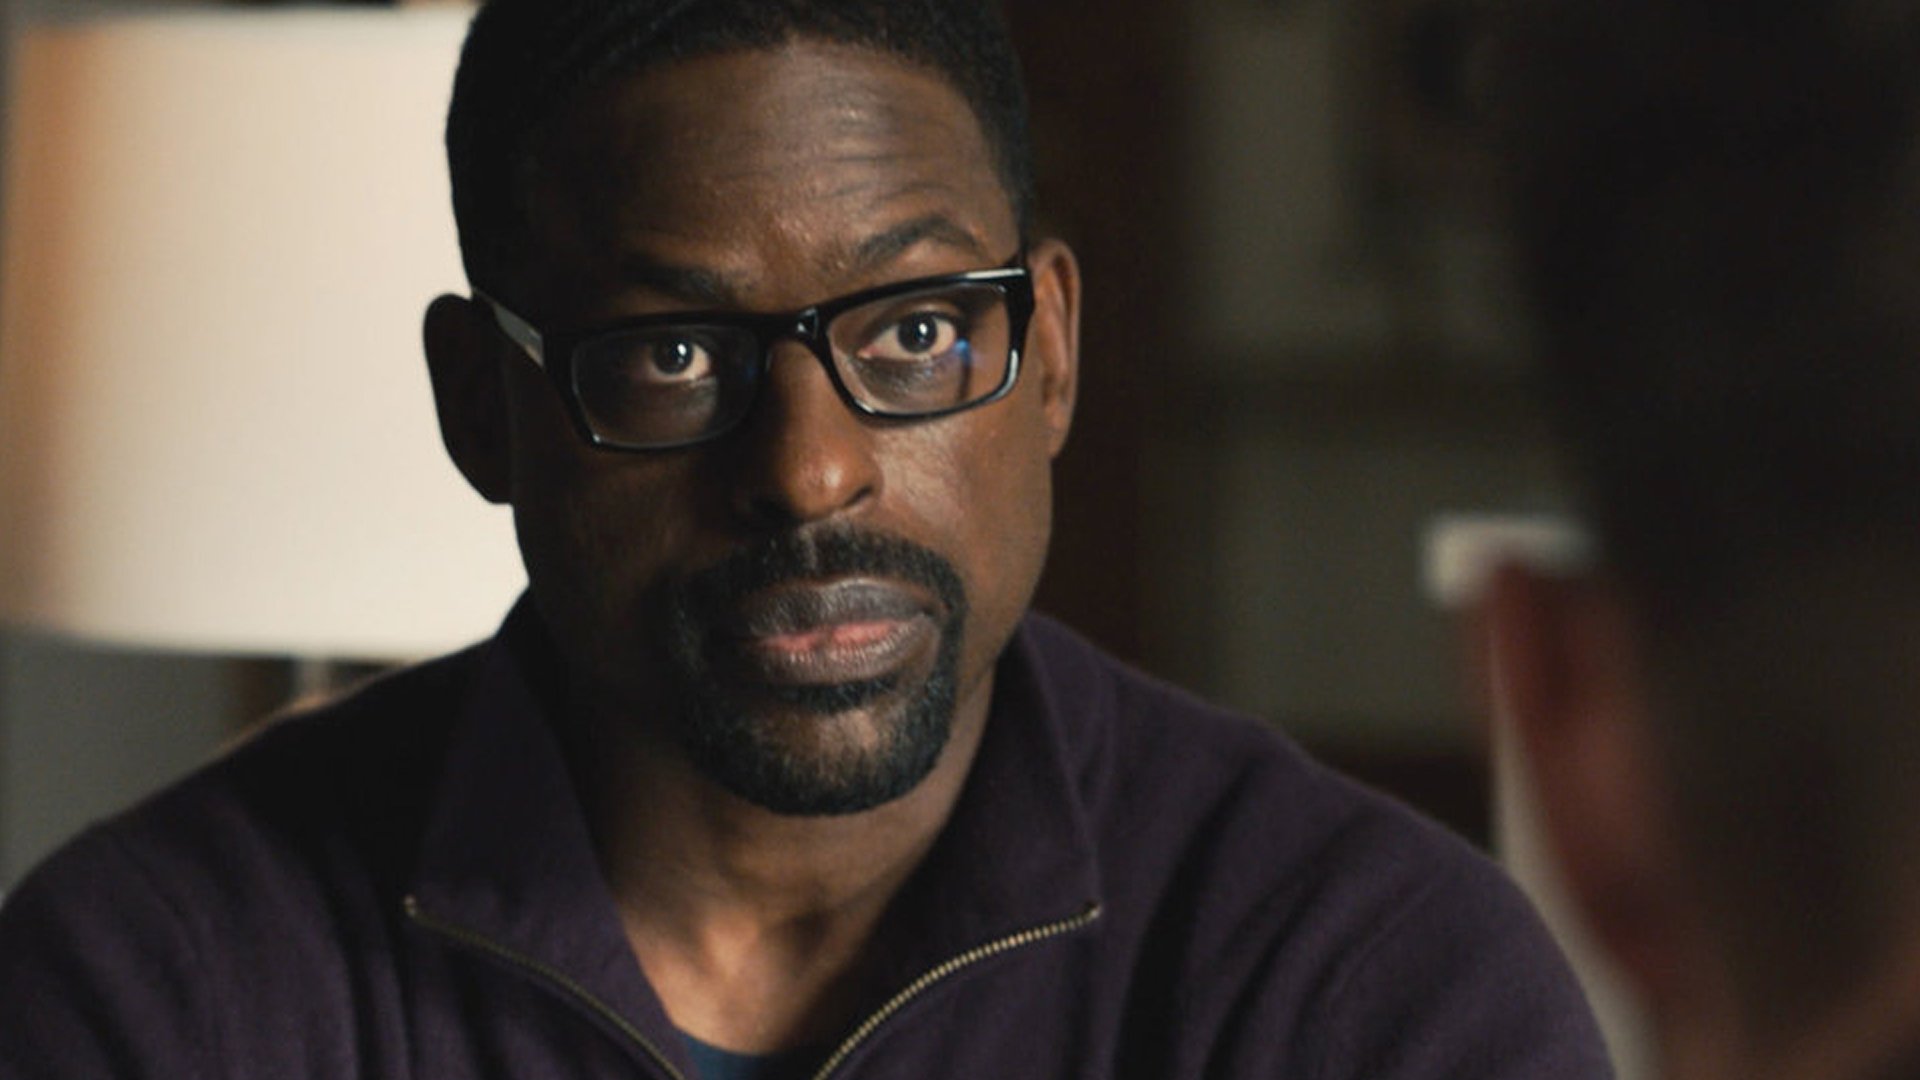 Sterling K. Brown as Randall Pearson looks at Justin Hartley as Kevin Pearson in ‘This Is Us’ Season 5 Episode 13